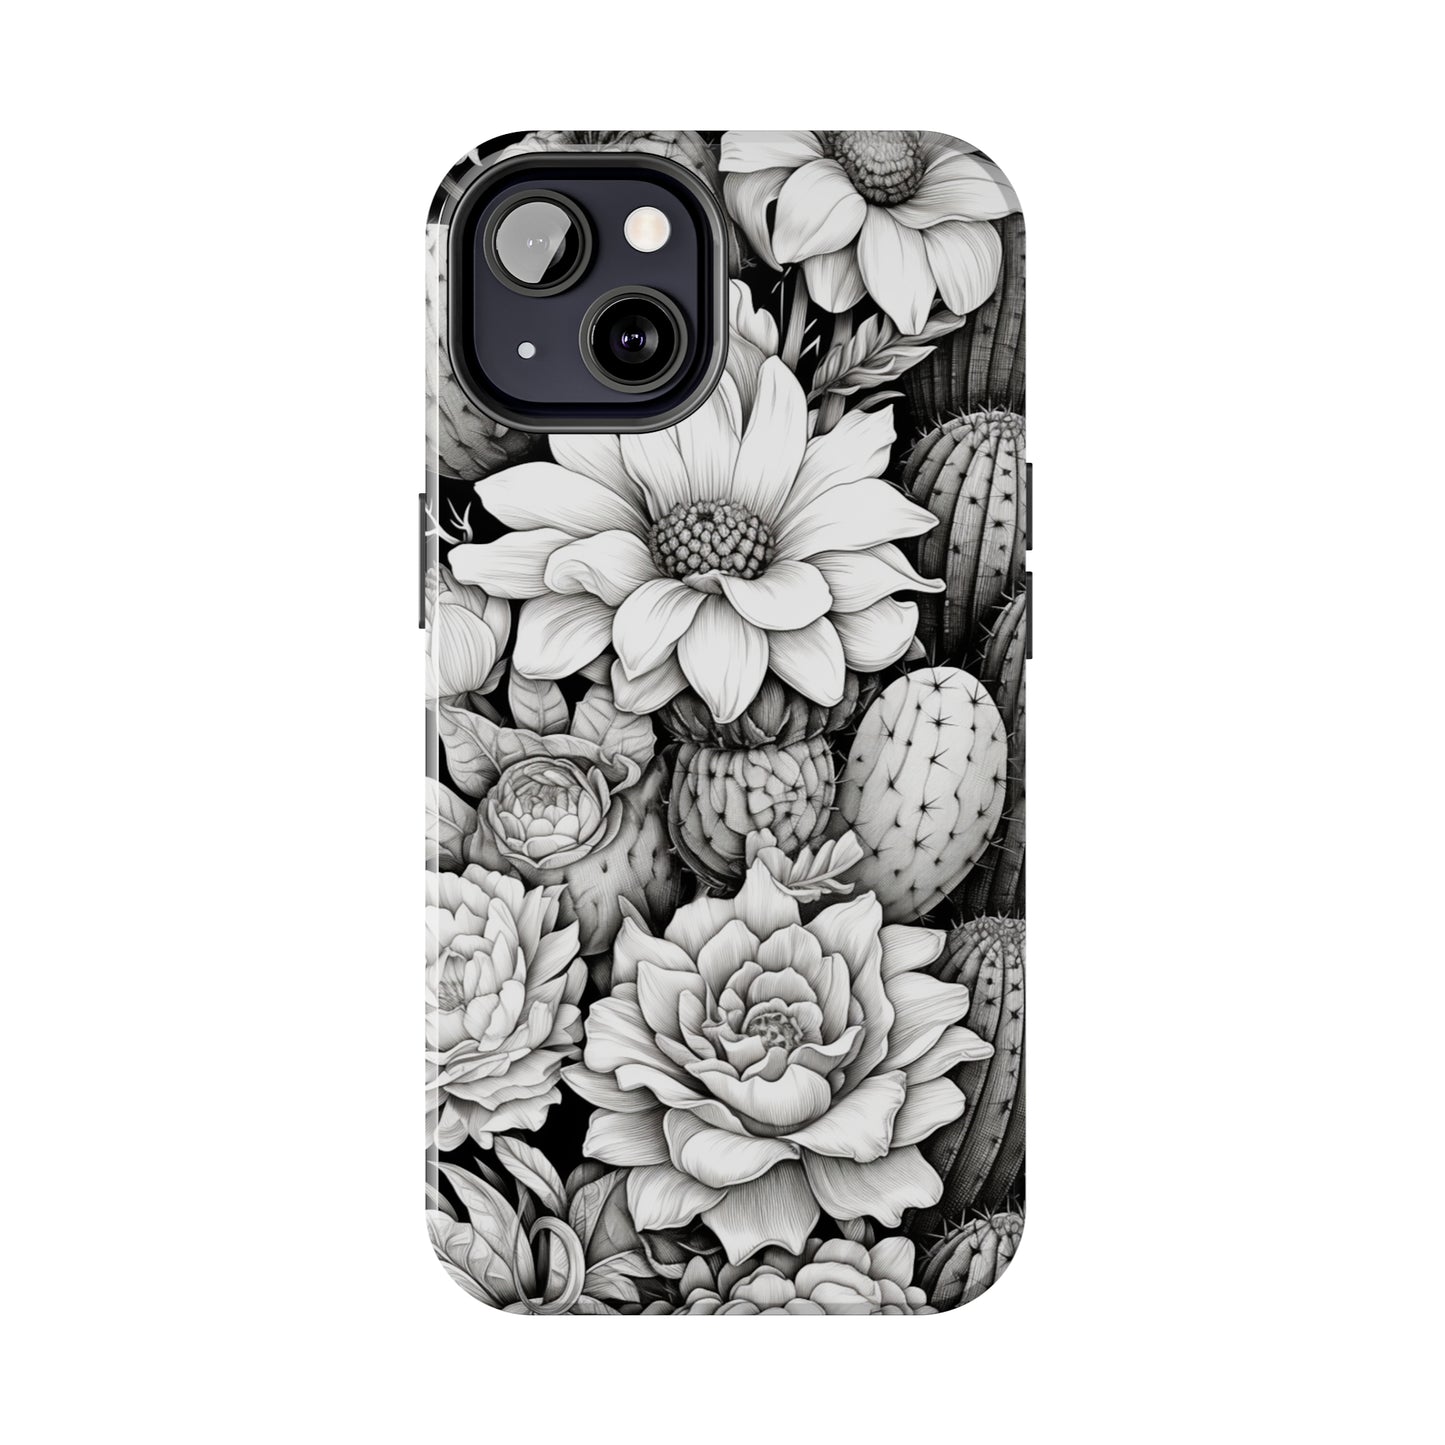 Desert Blooms: Floral Cactus Fusion | Nature's Resilience iPhone Case